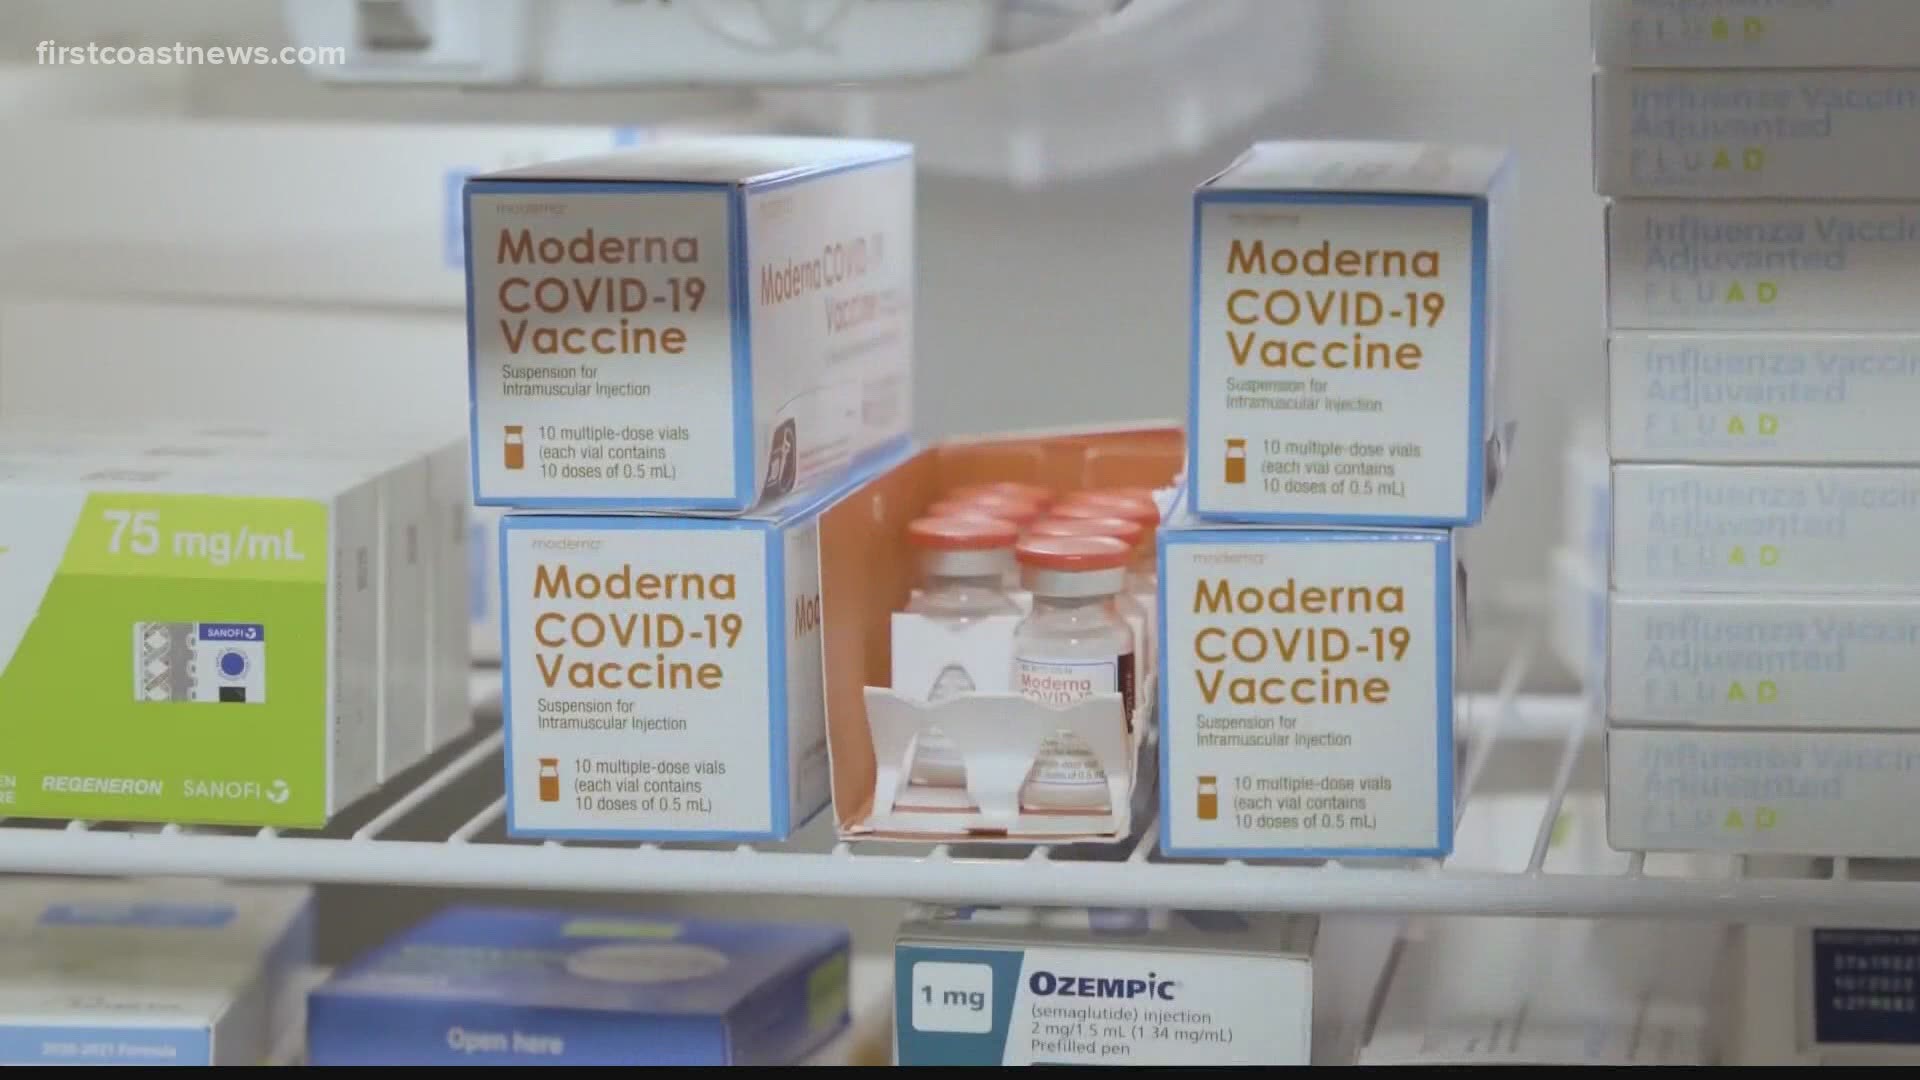 Appointments for COVID-19 vaccines at Publix, Walmart quickly fill up in Jacksonville